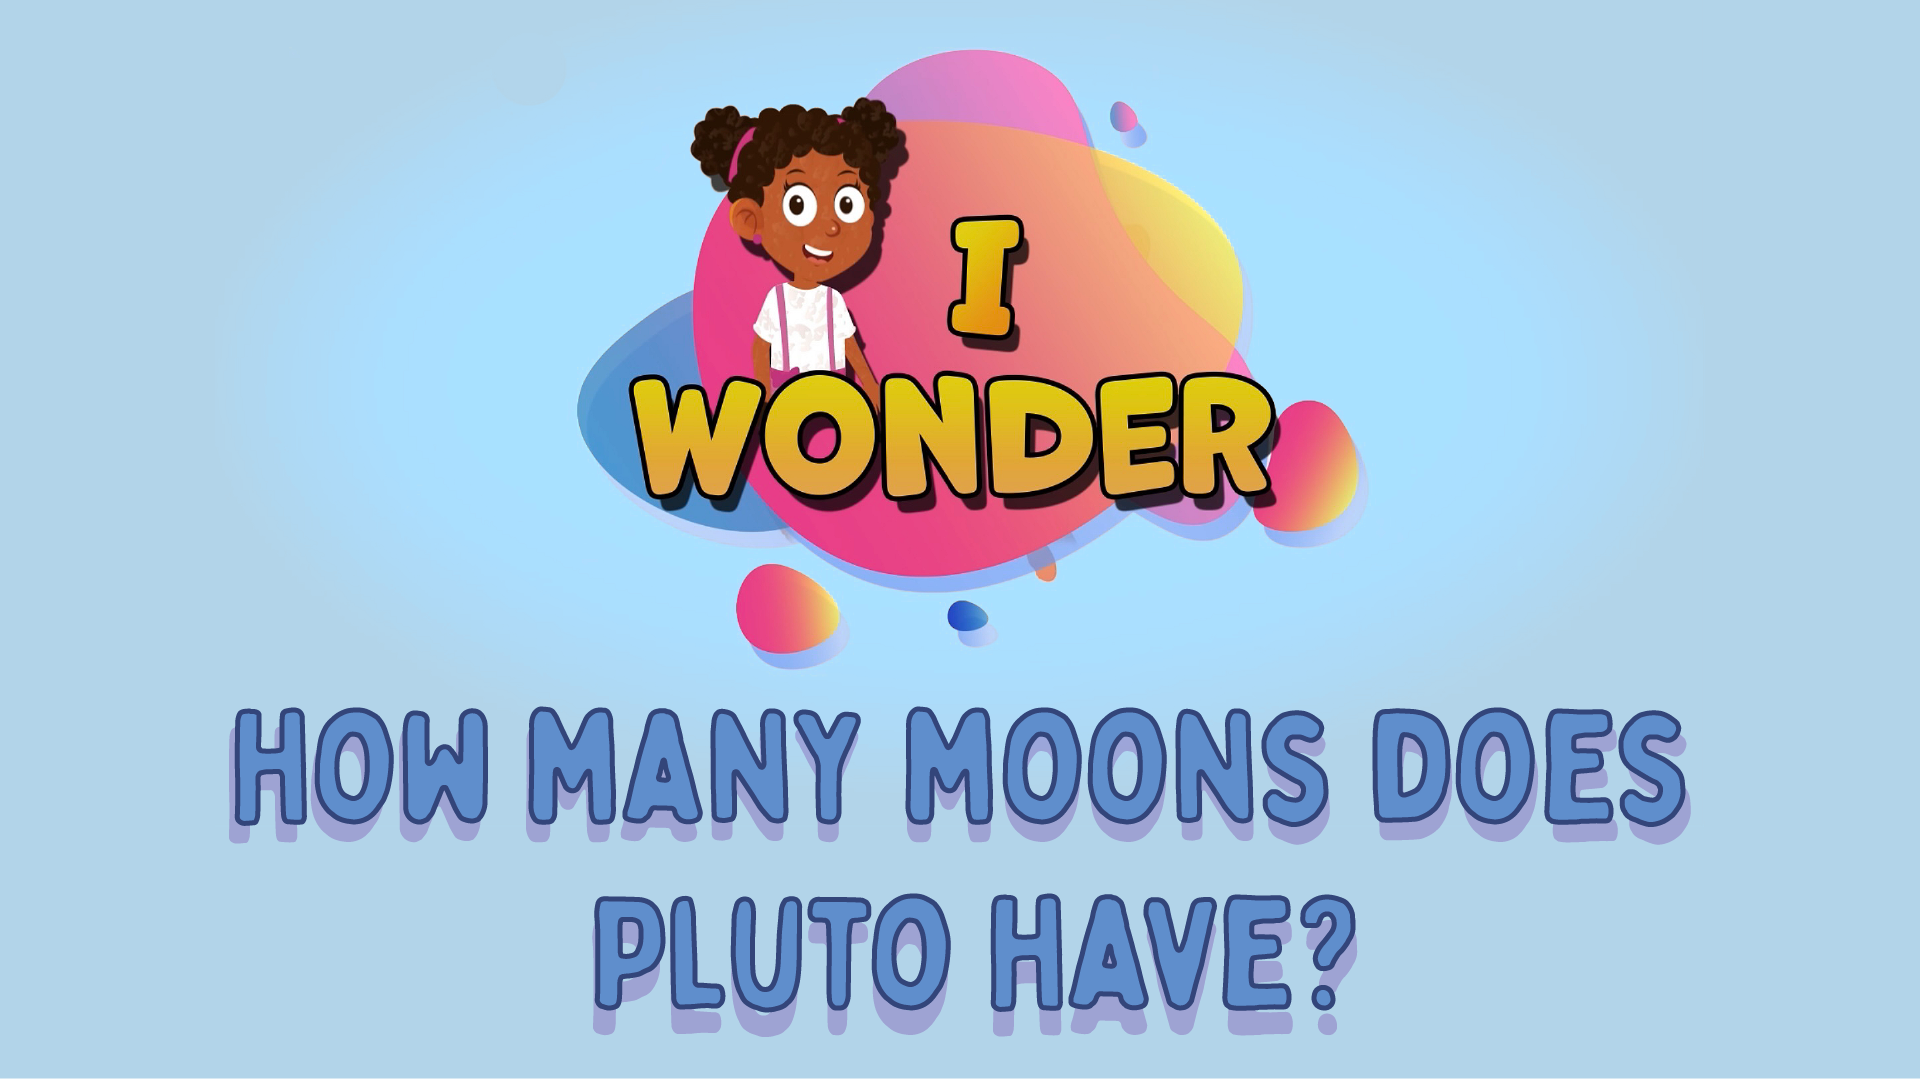 How Many Moons Does Pluto Have?